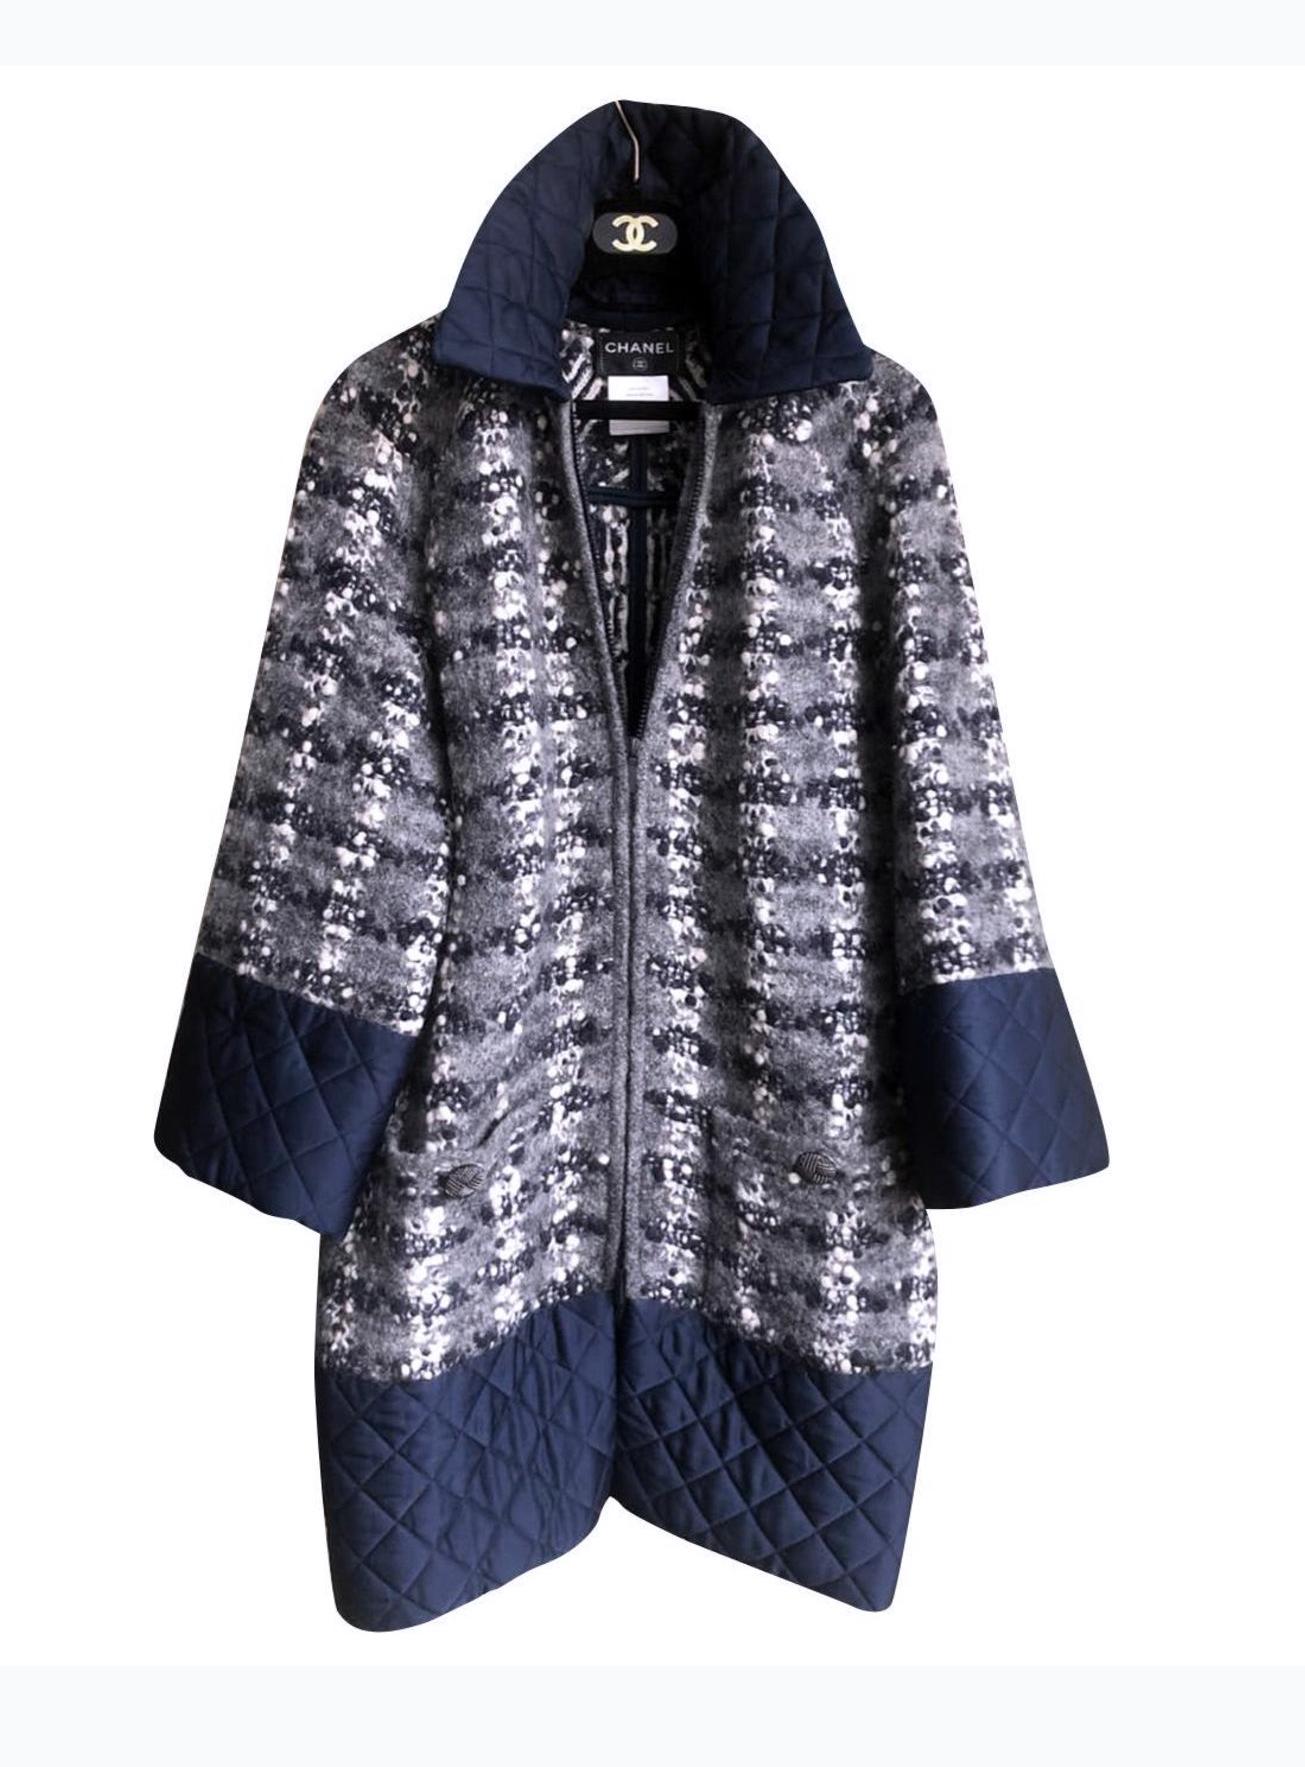 Chanel 8K$ New Boucle Tweed Coat In New Condition For Sale In Dubai, AE